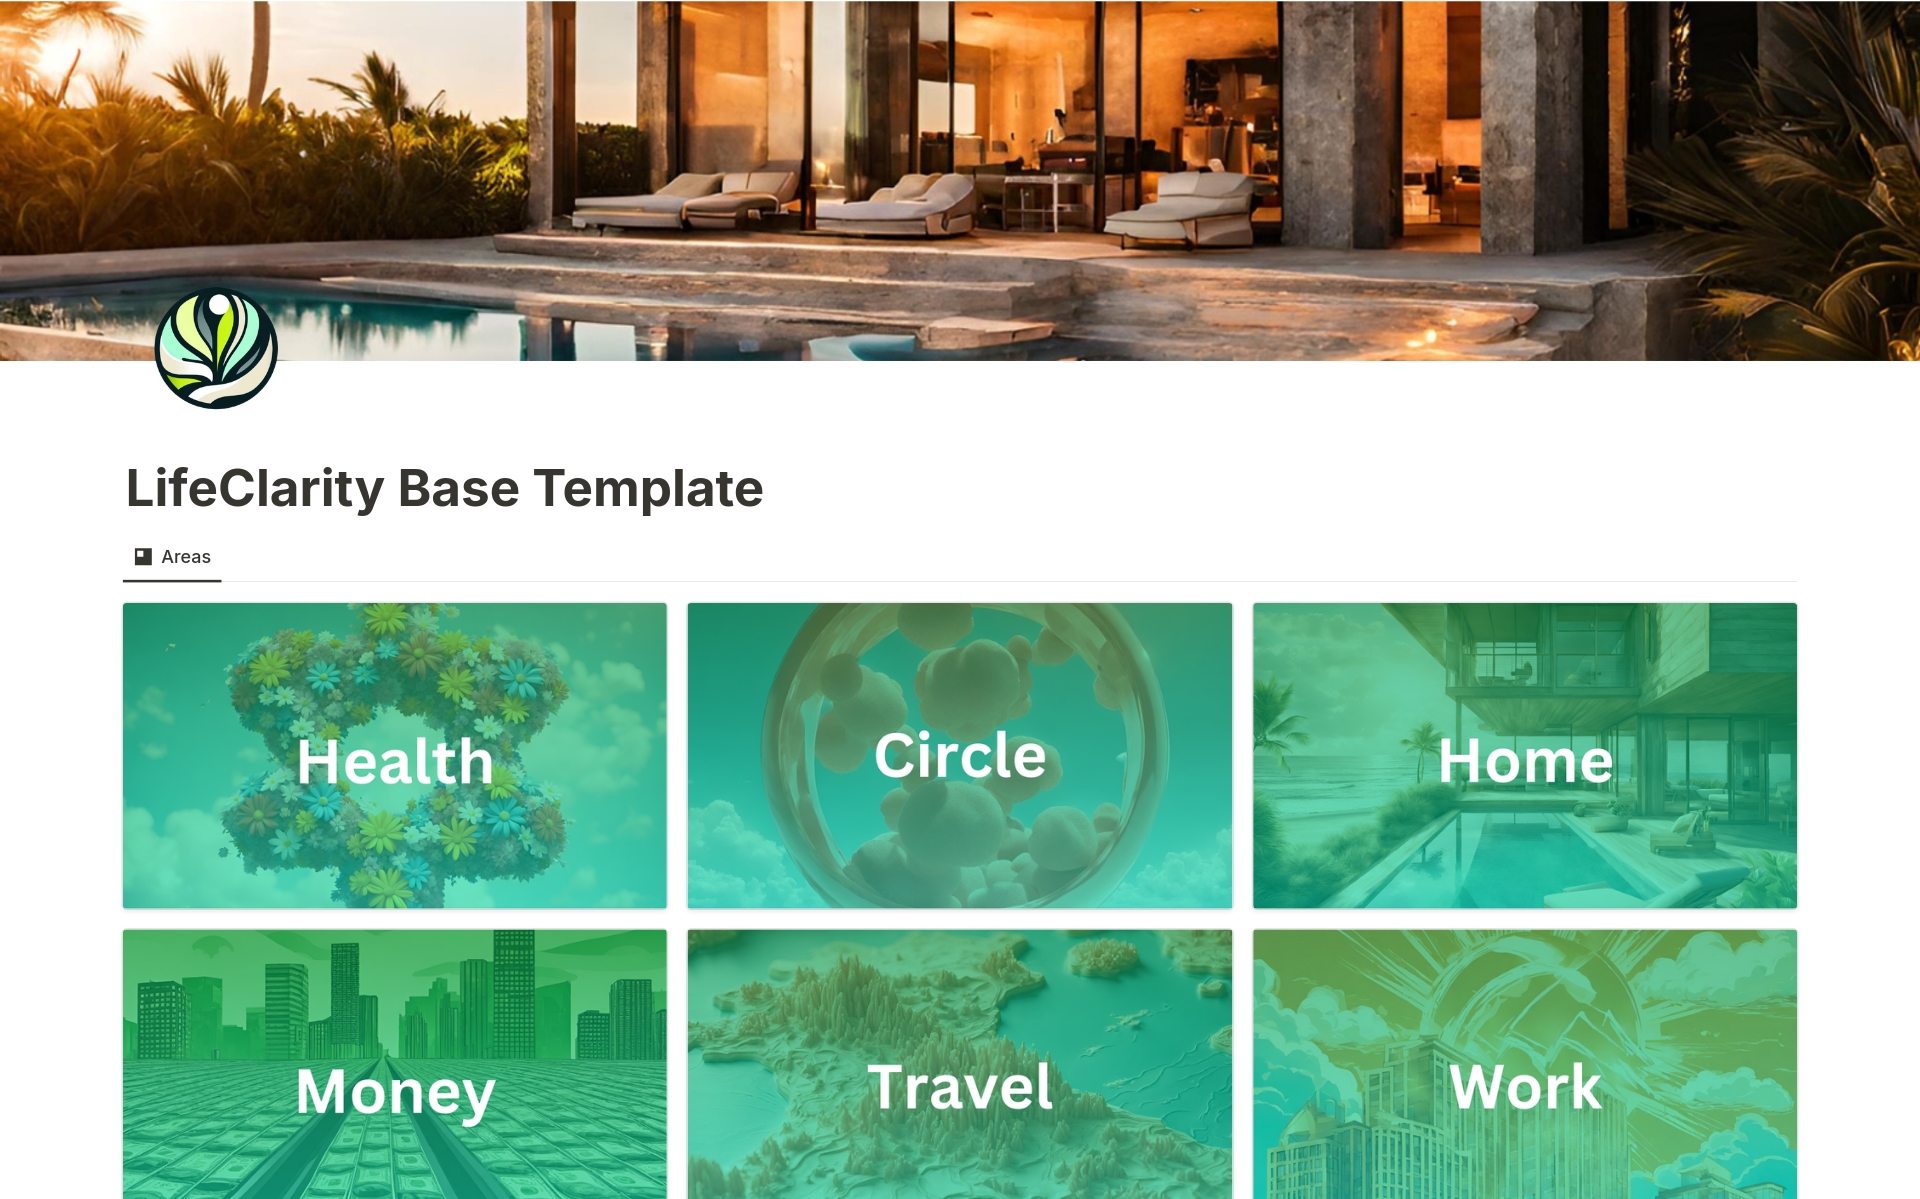 Elevate your organization with Life Clarity Labs' Notion templates. Our system features a comprehensive dashboard that includes areas of life, tasks, a calendar, a habit tracker, and a full list of projects, designed for seamless personal and professional management. 